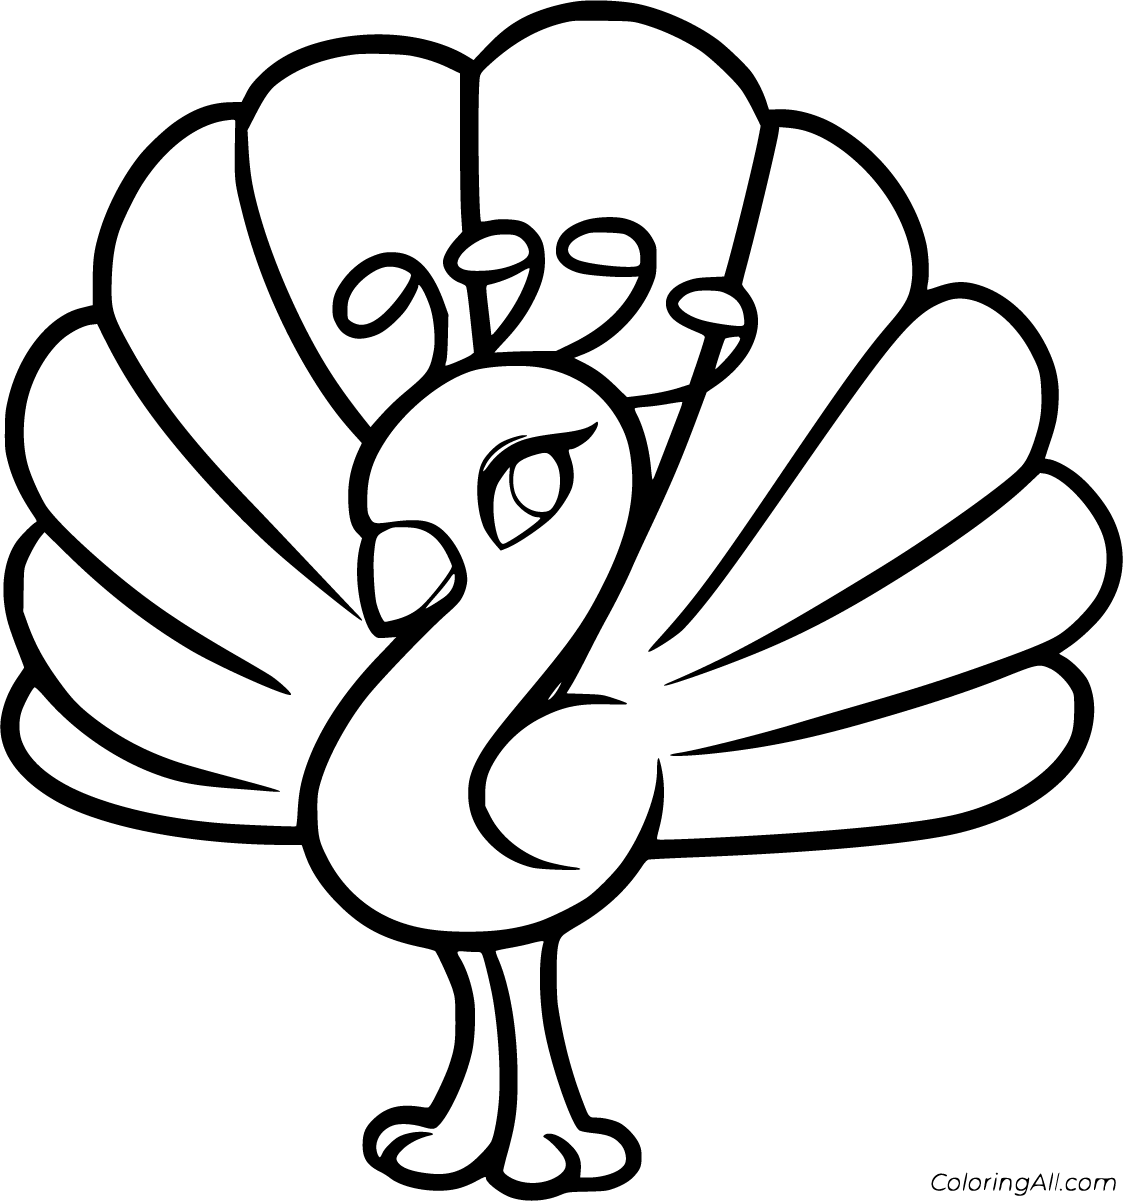 Peacock Coloring Pages - ColoringAll